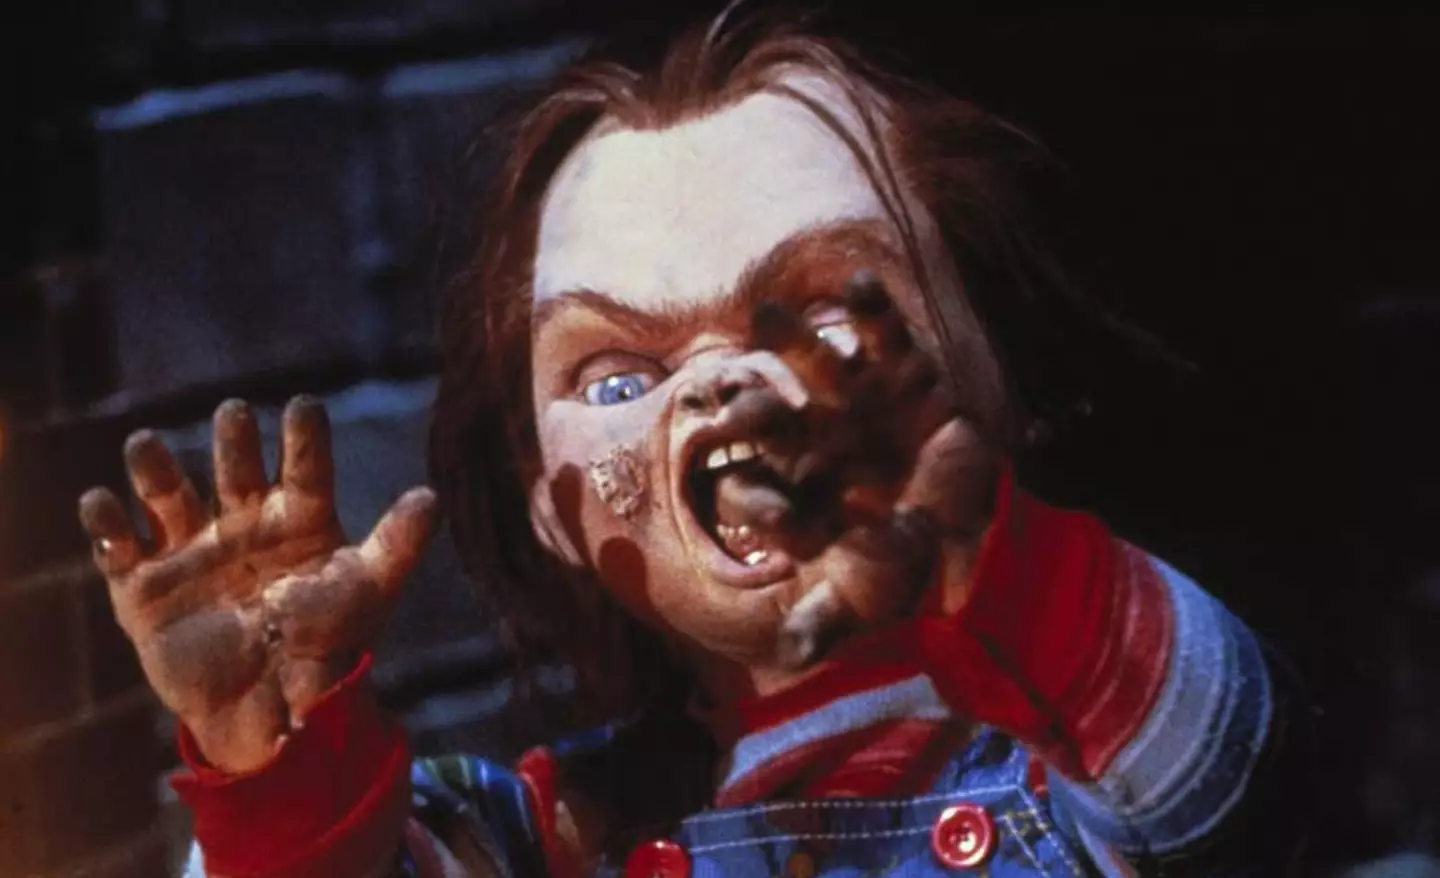 A five-year-old dressed as Chucky has been spotted running around a neighbourhood in Alabama.